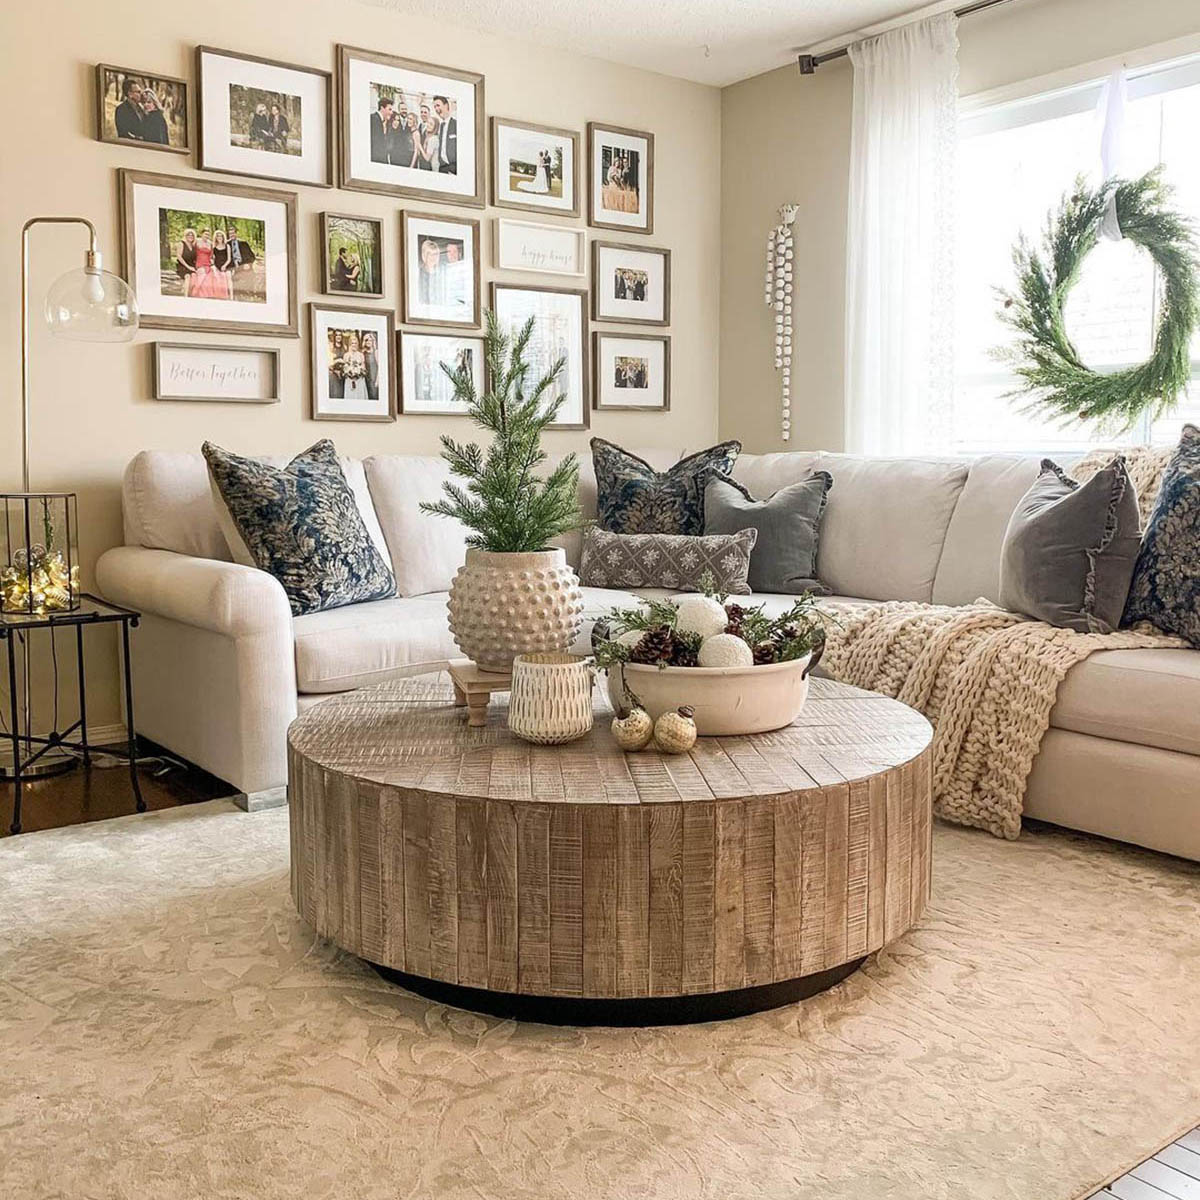 What Kind Of Coffee Table Looks Best With A Sectional